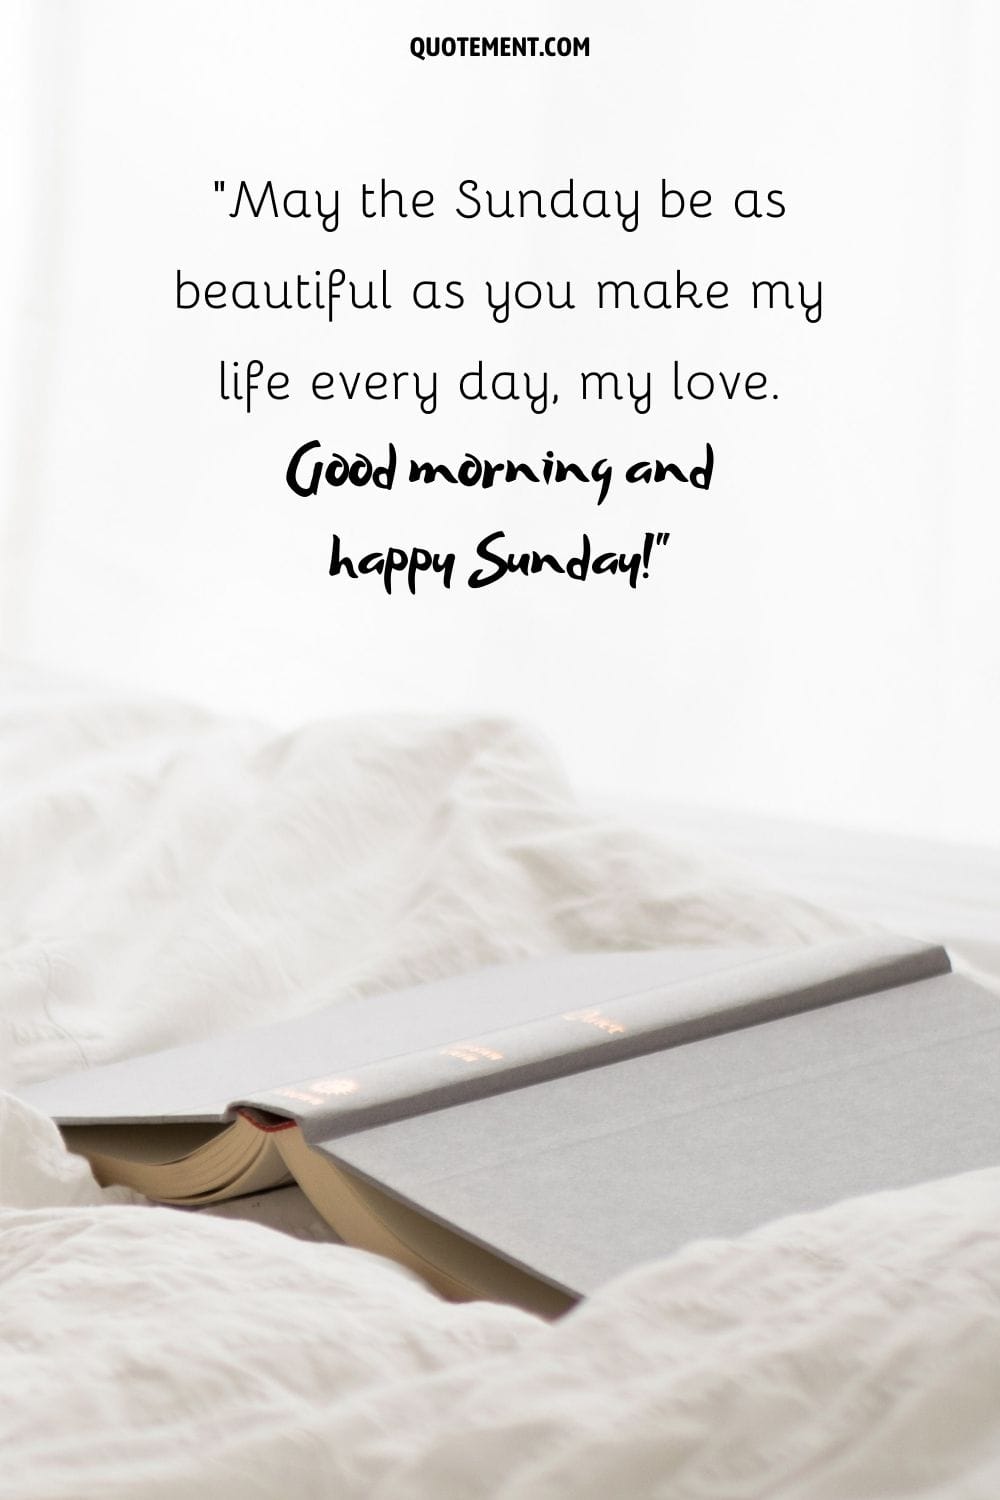 dark book on white sheets representing sunday good morning wish for a friend